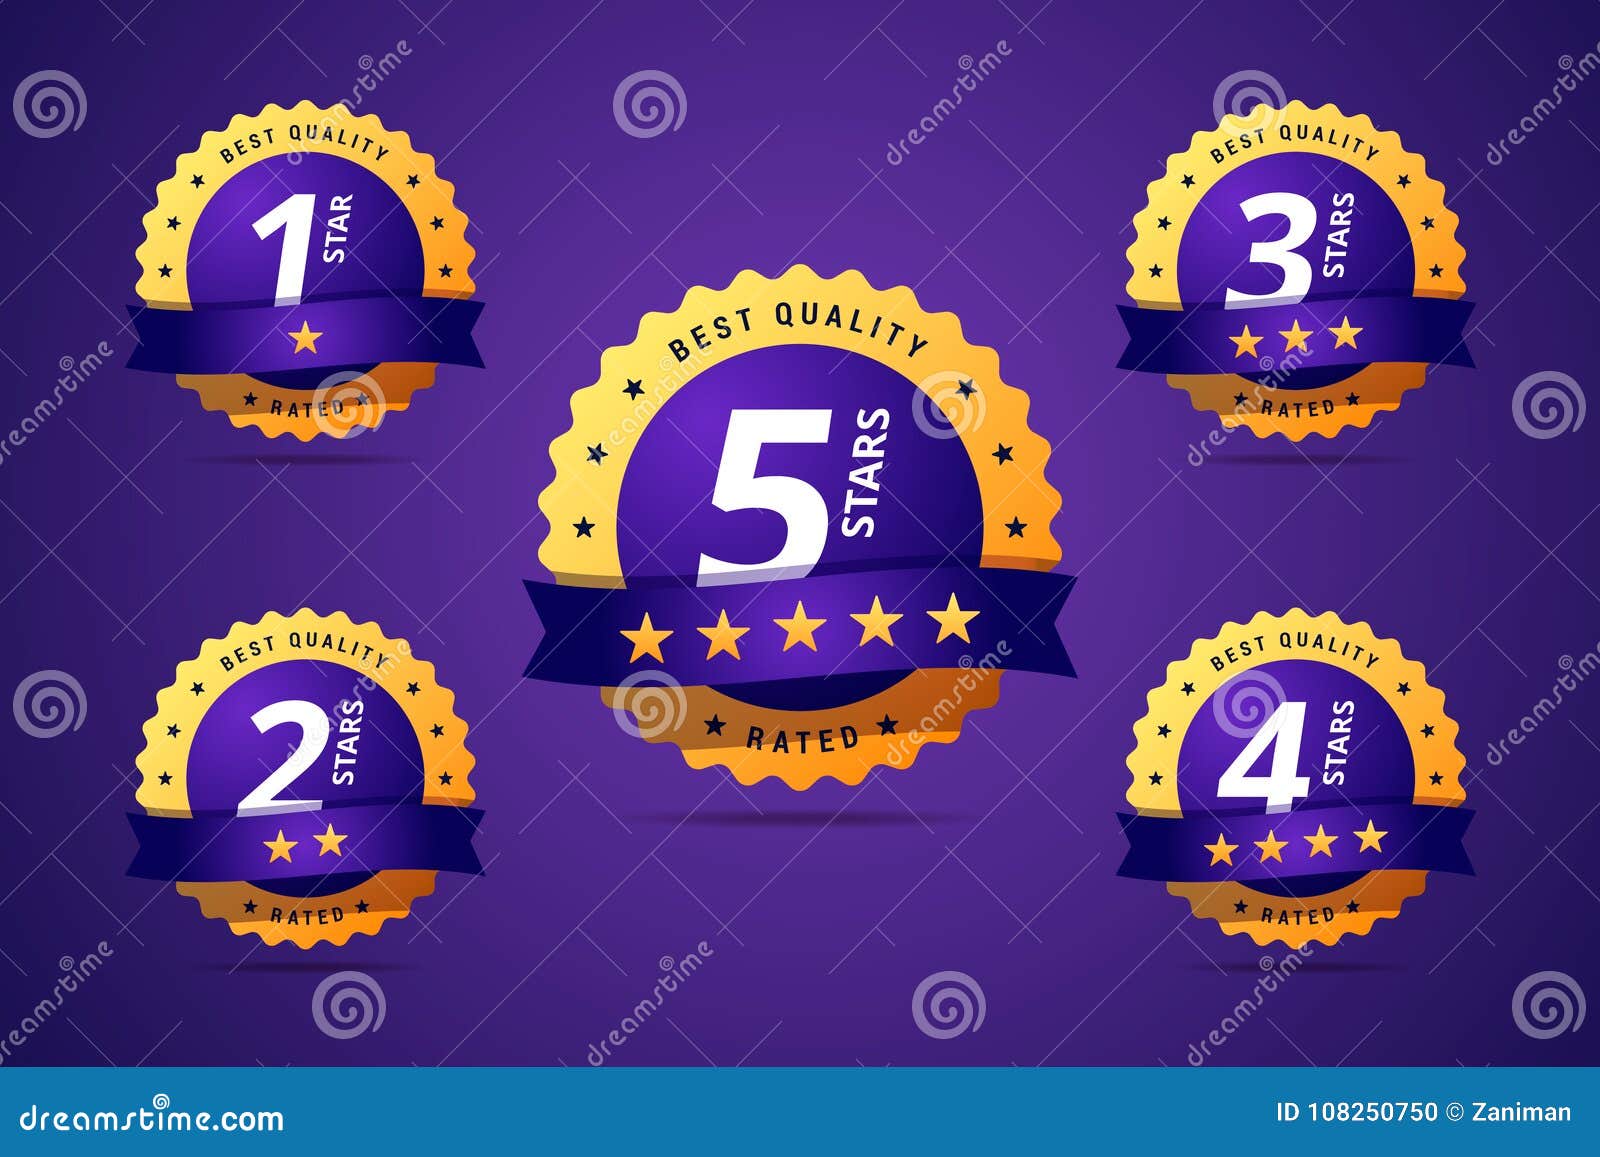 Stamp Rating Stock Illustrations – 7,269 Stamp Rating Stock Illustrations,  Vectors & Clipart - Dreamstime